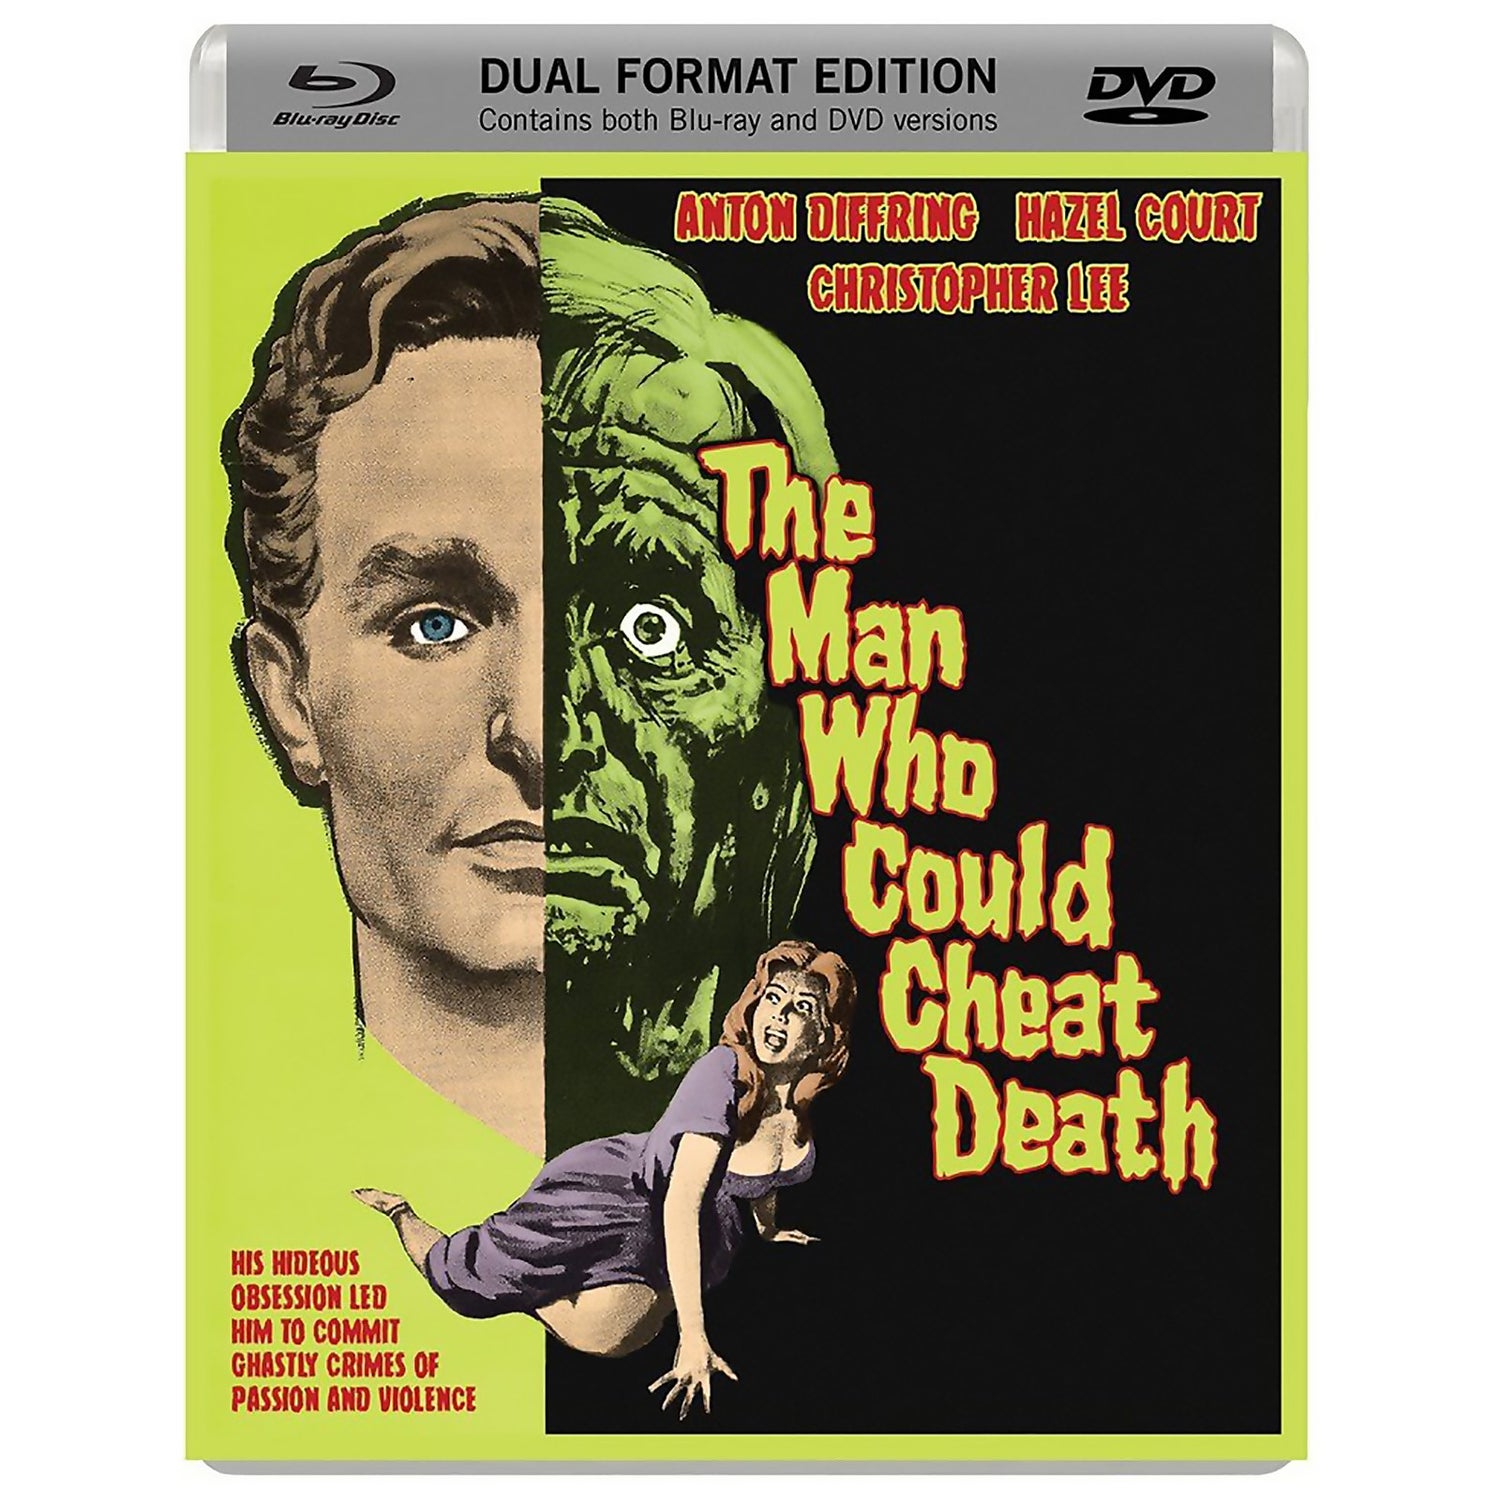 The Man Who Could Cheat Death (Includes DVD)